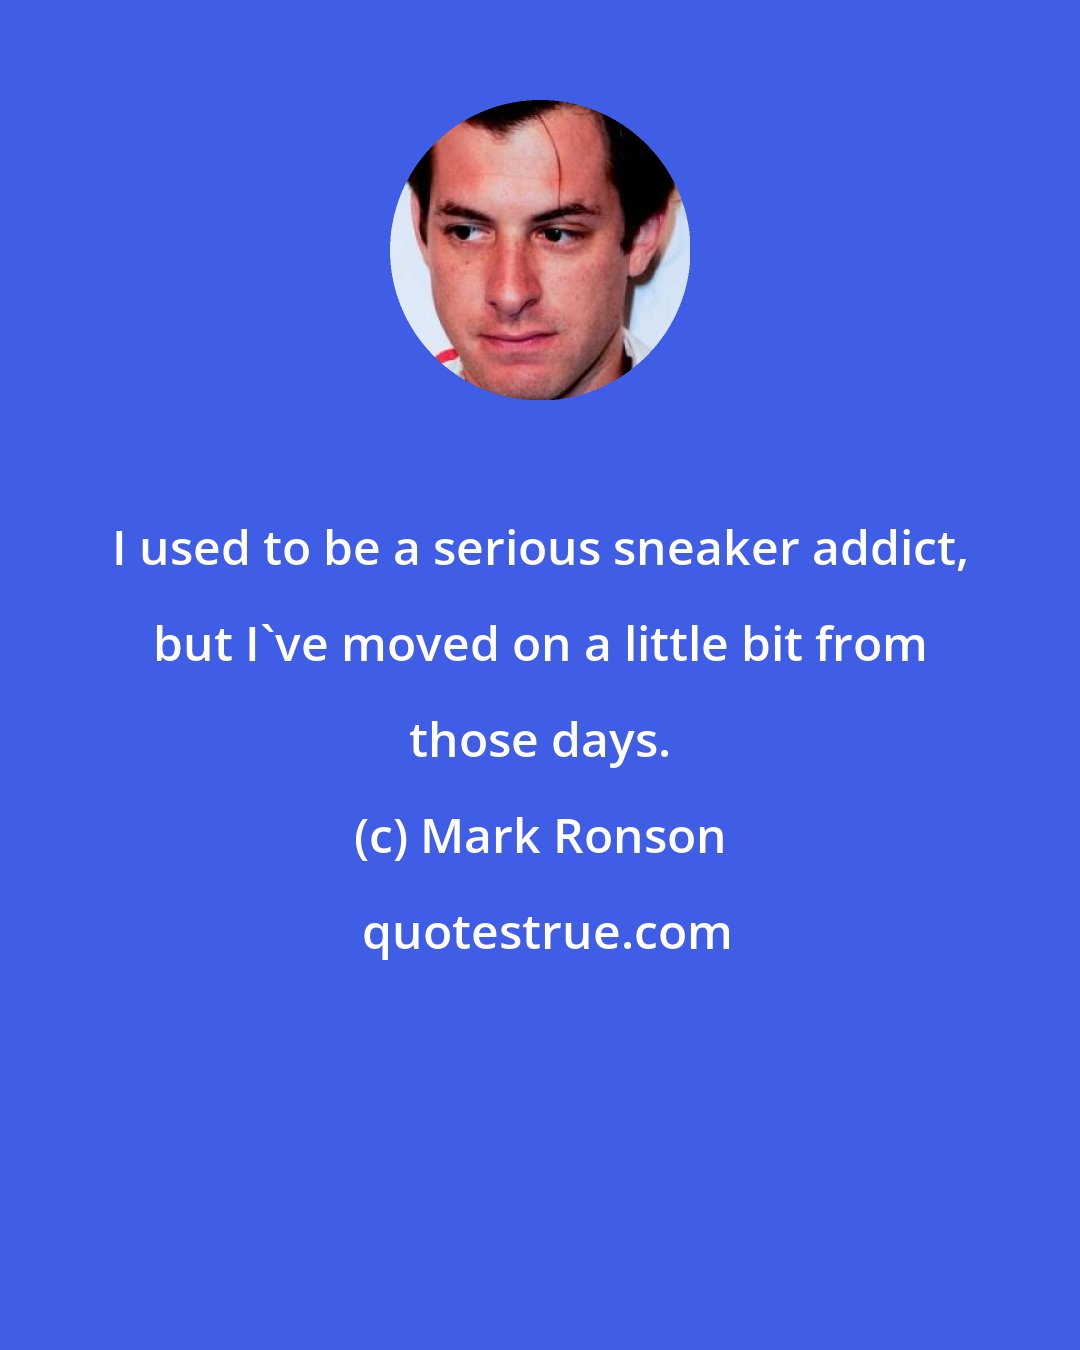 Mark Ronson: I used to be a serious sneaker addict, but I've moved on a little bit from those days.